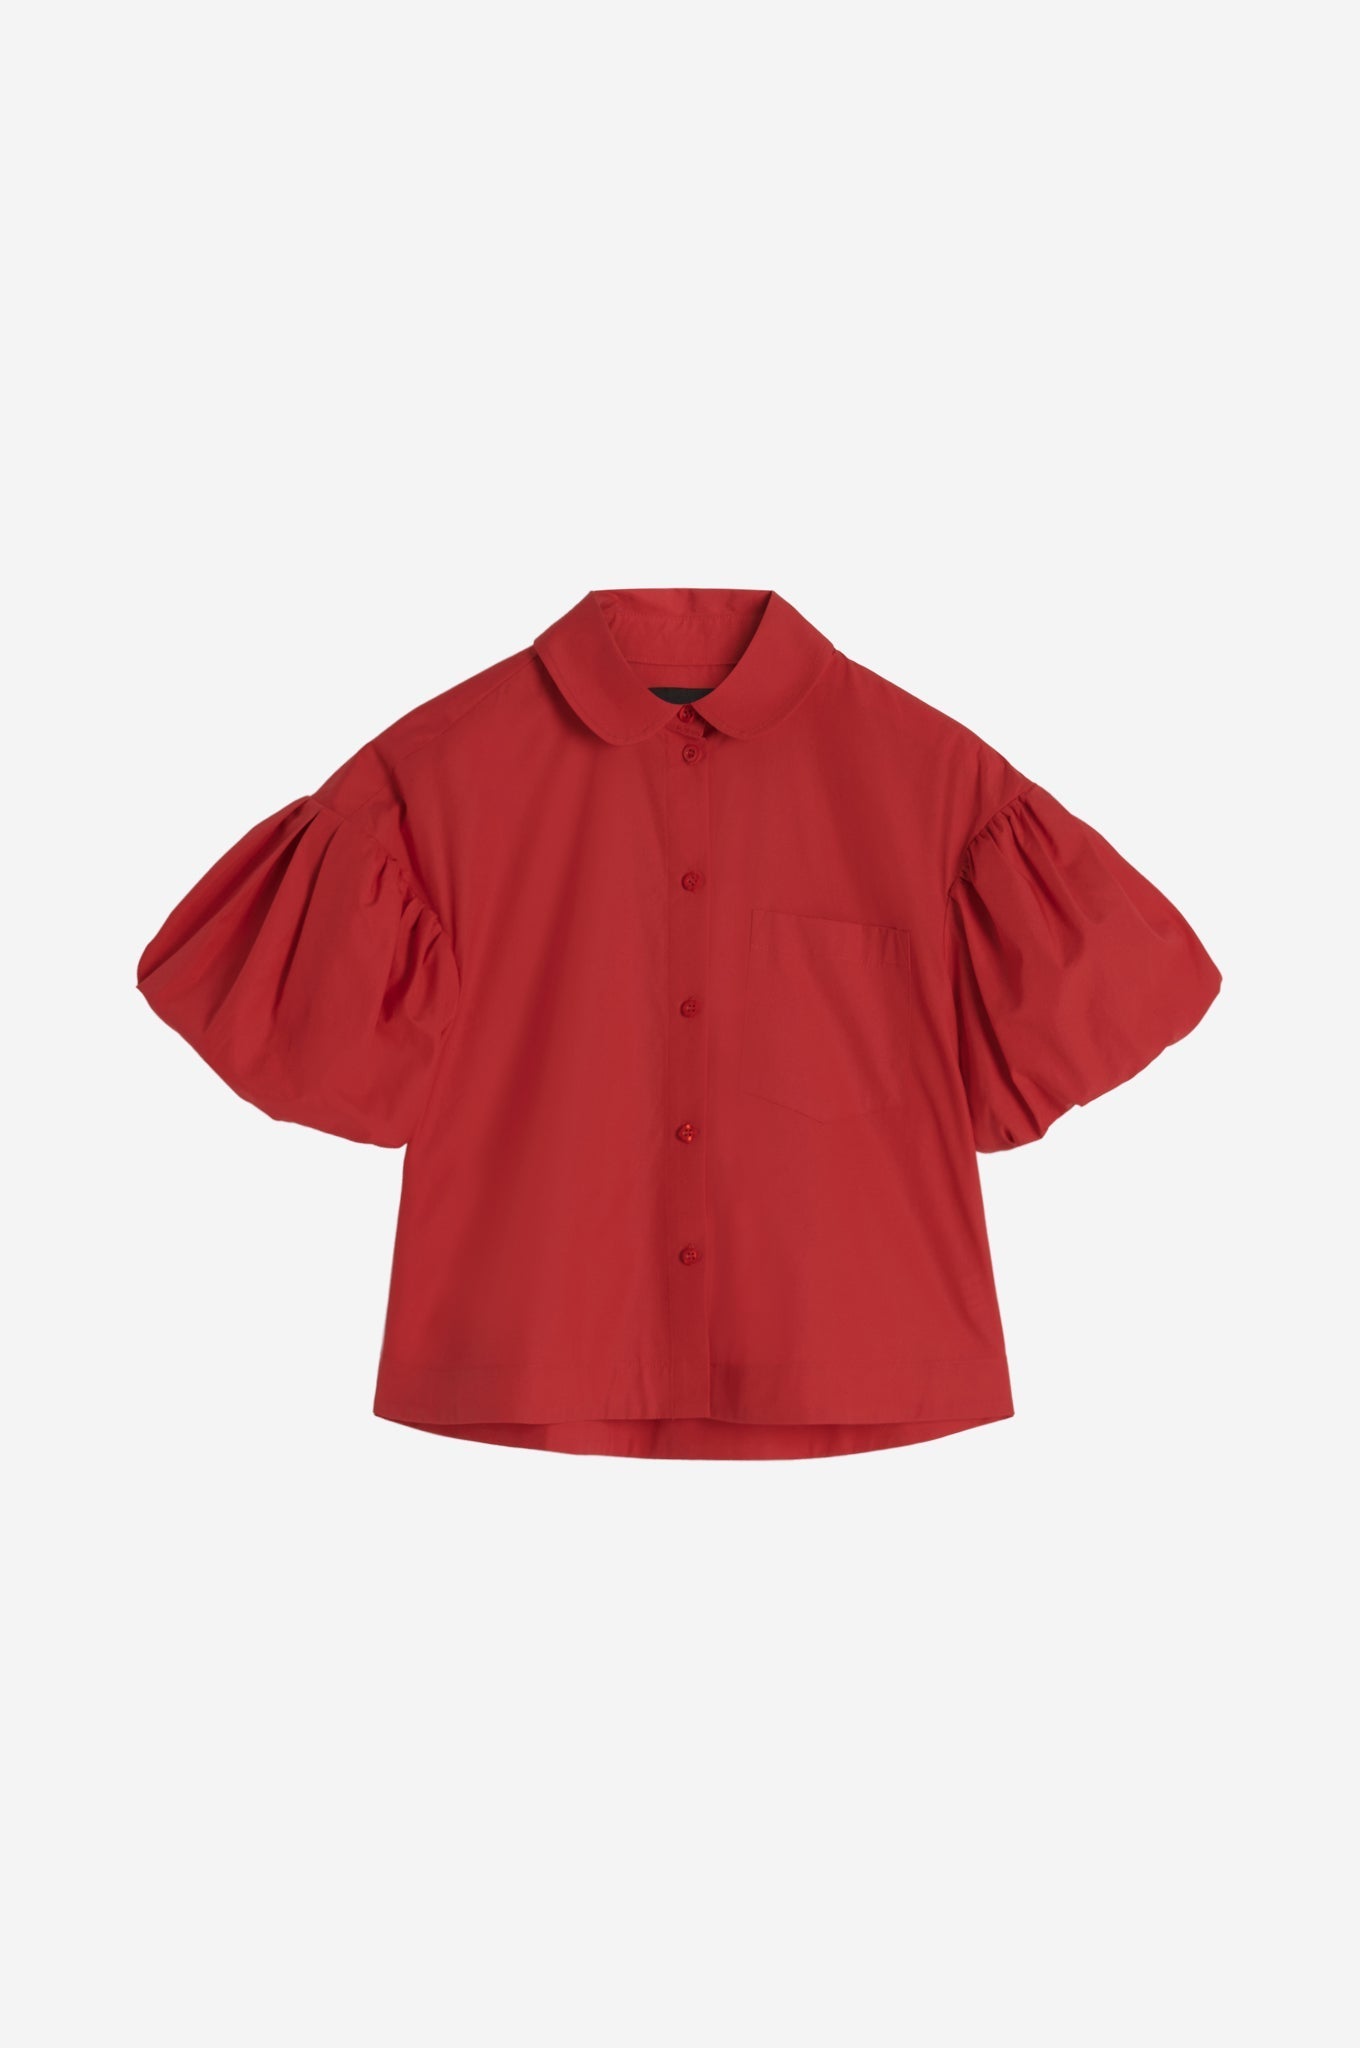 Cropped Puff Sleeve Shirt